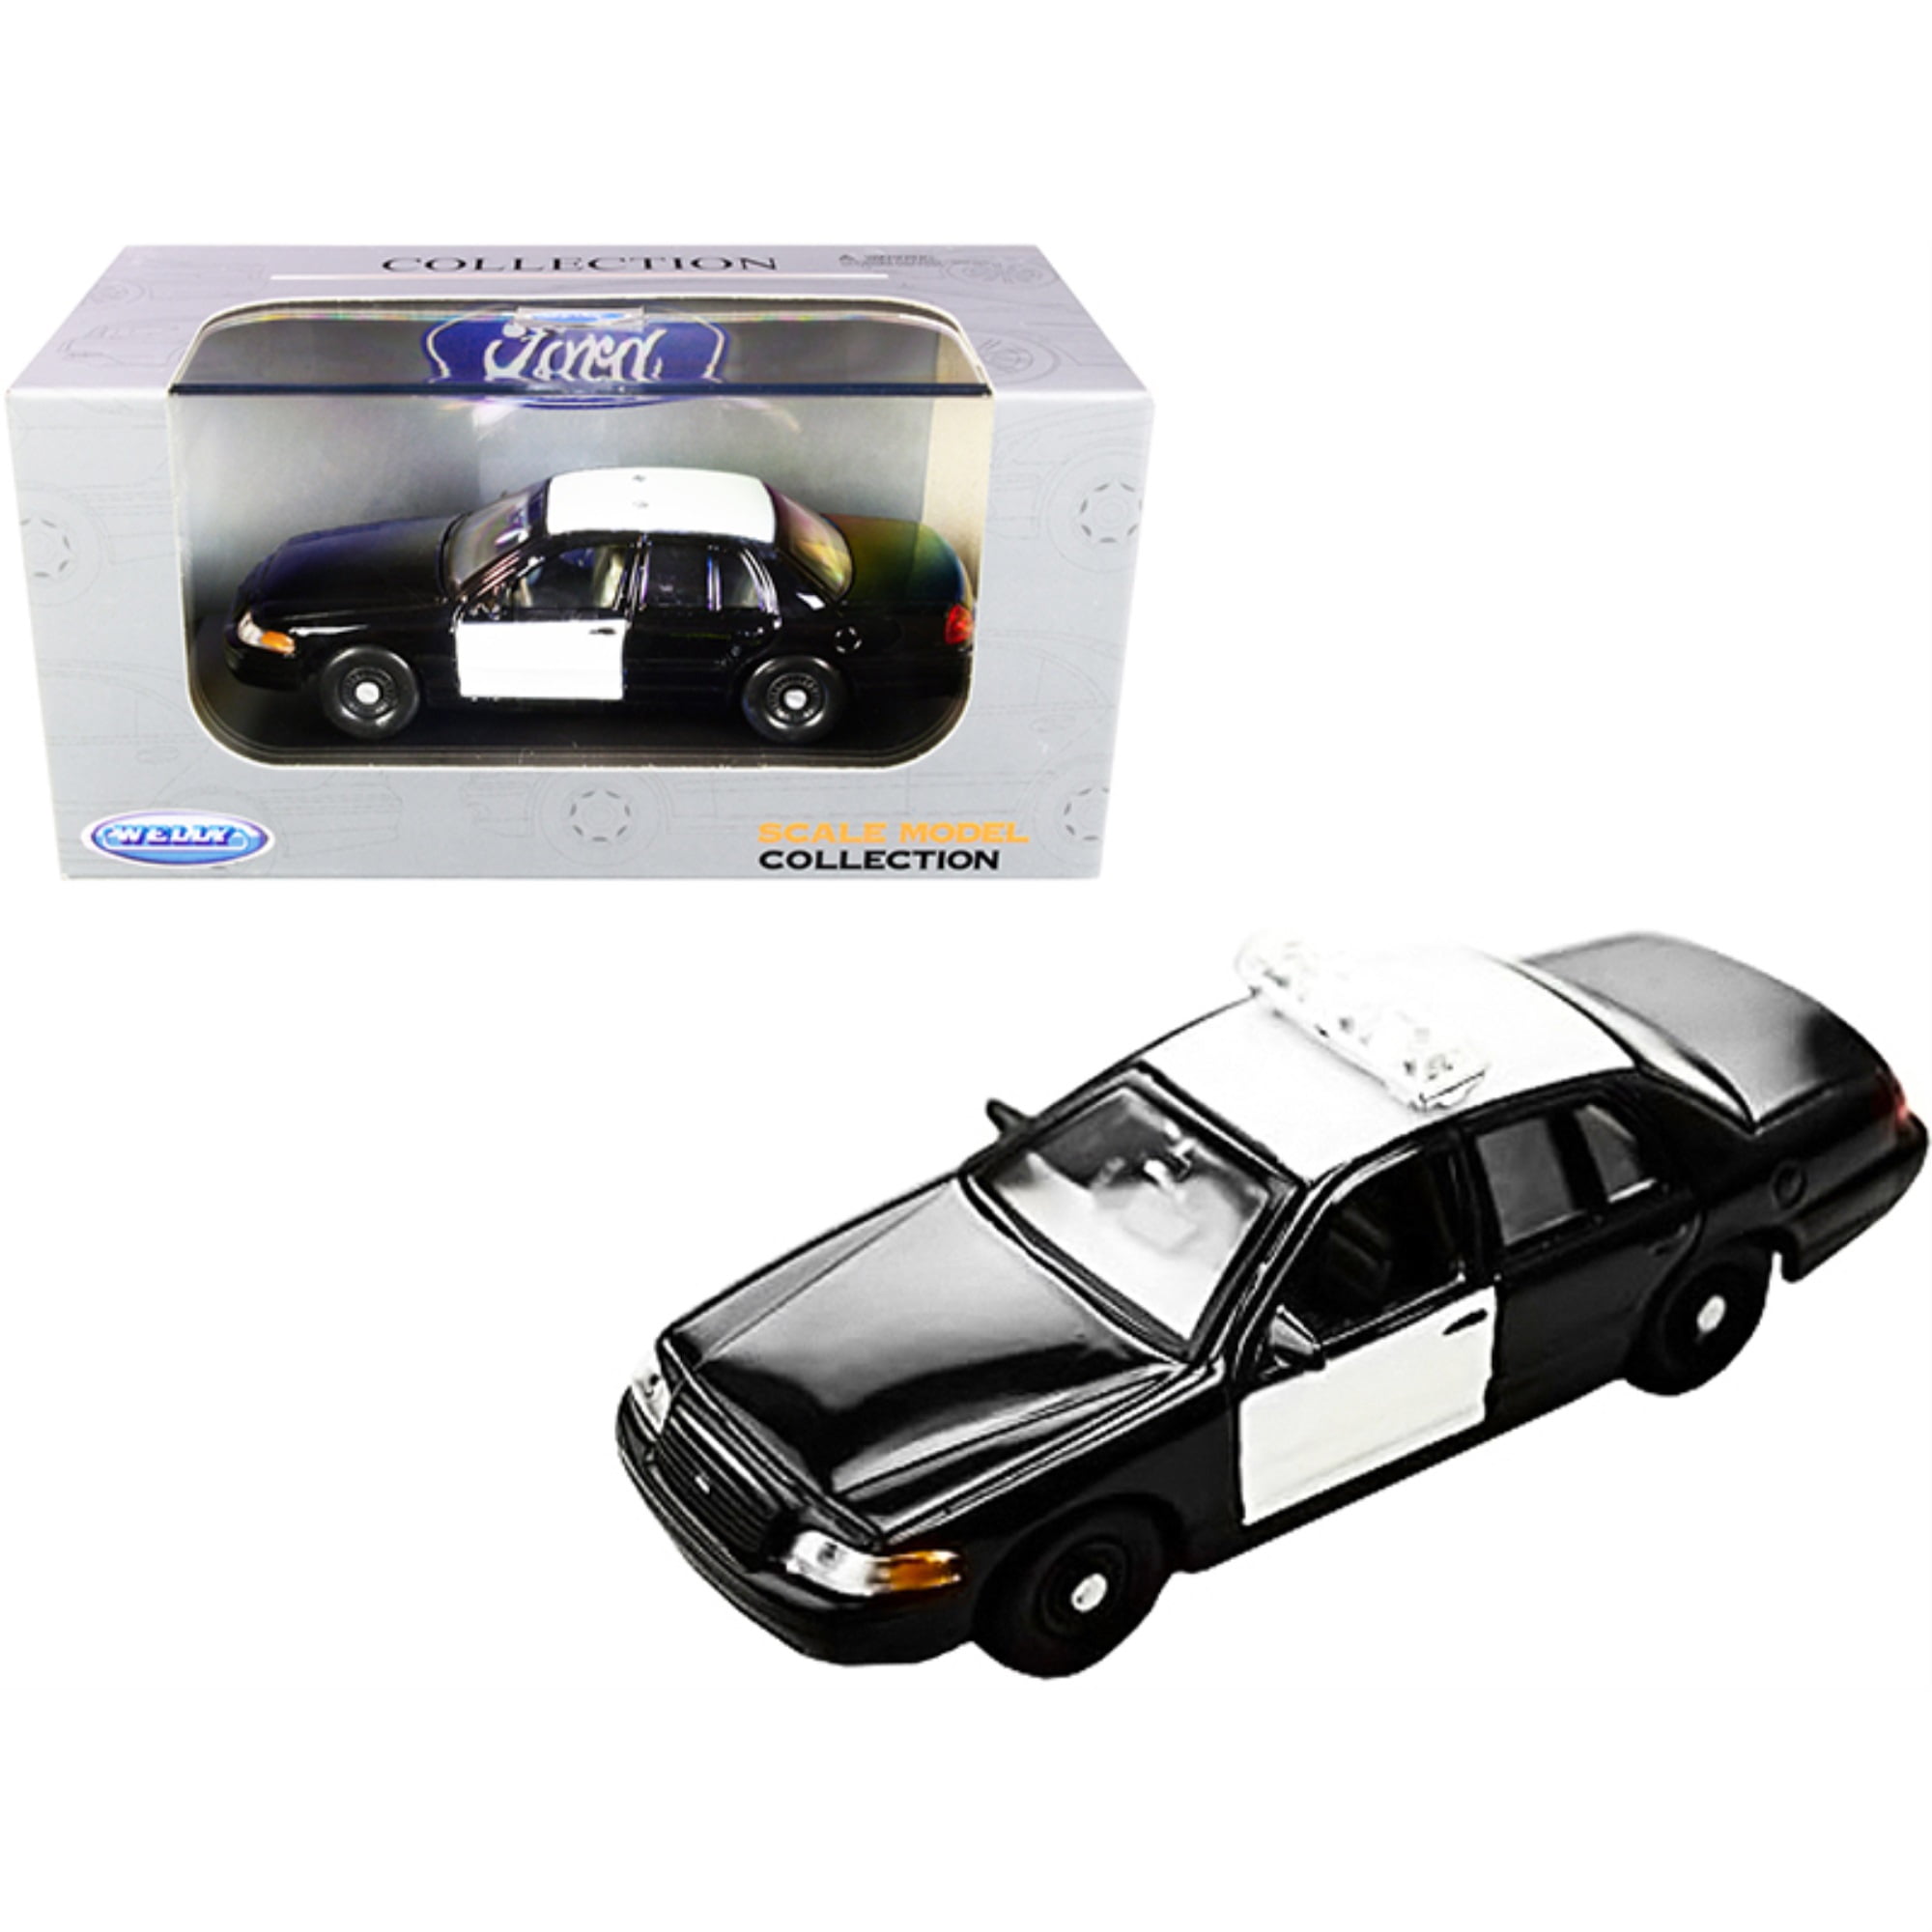 Details about   San Francisco Police 1999 Limited Edition Ford Crown Victoria Police Series 1:43 